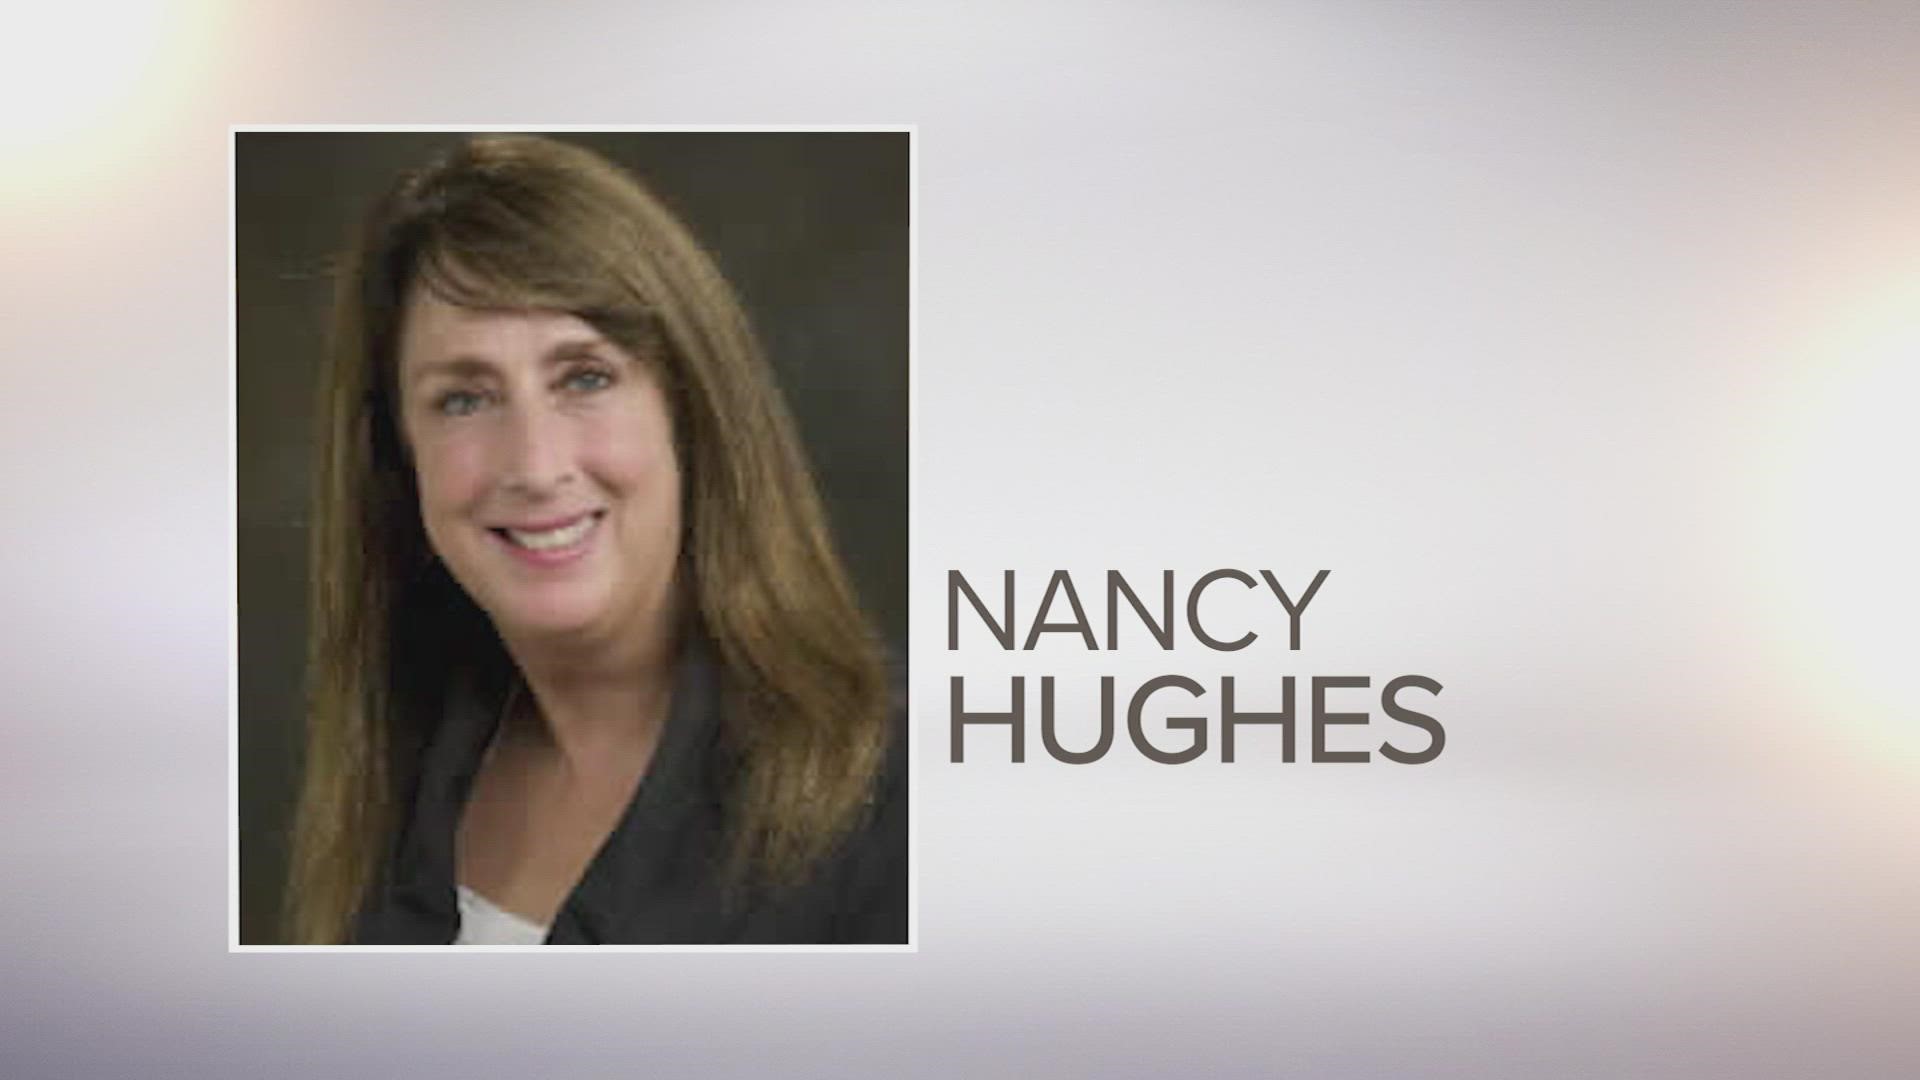 Dr. Nancy Hughes was found near her bicycle not far from her family practice.